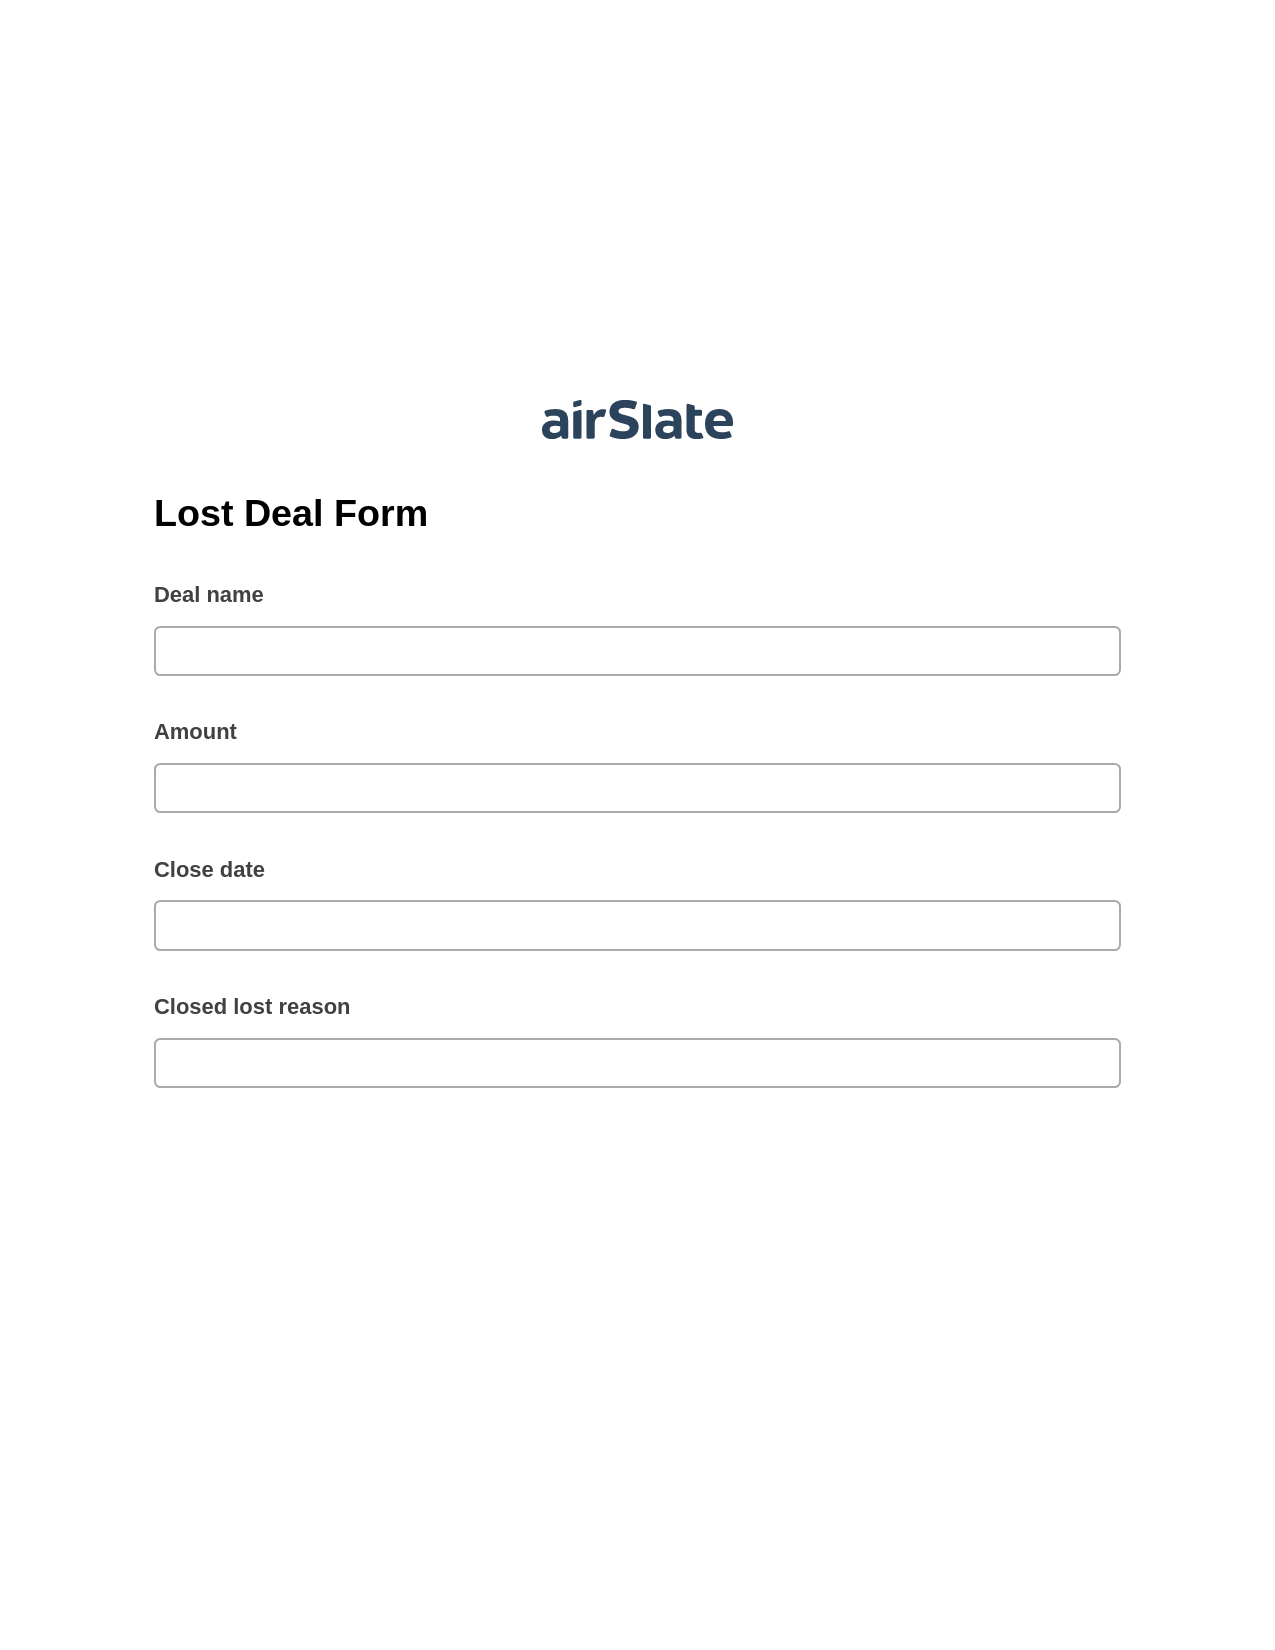 Lost Deal Form Pre-fill from MySQL Bot, Webhook Bot, Post-finish Document Bot